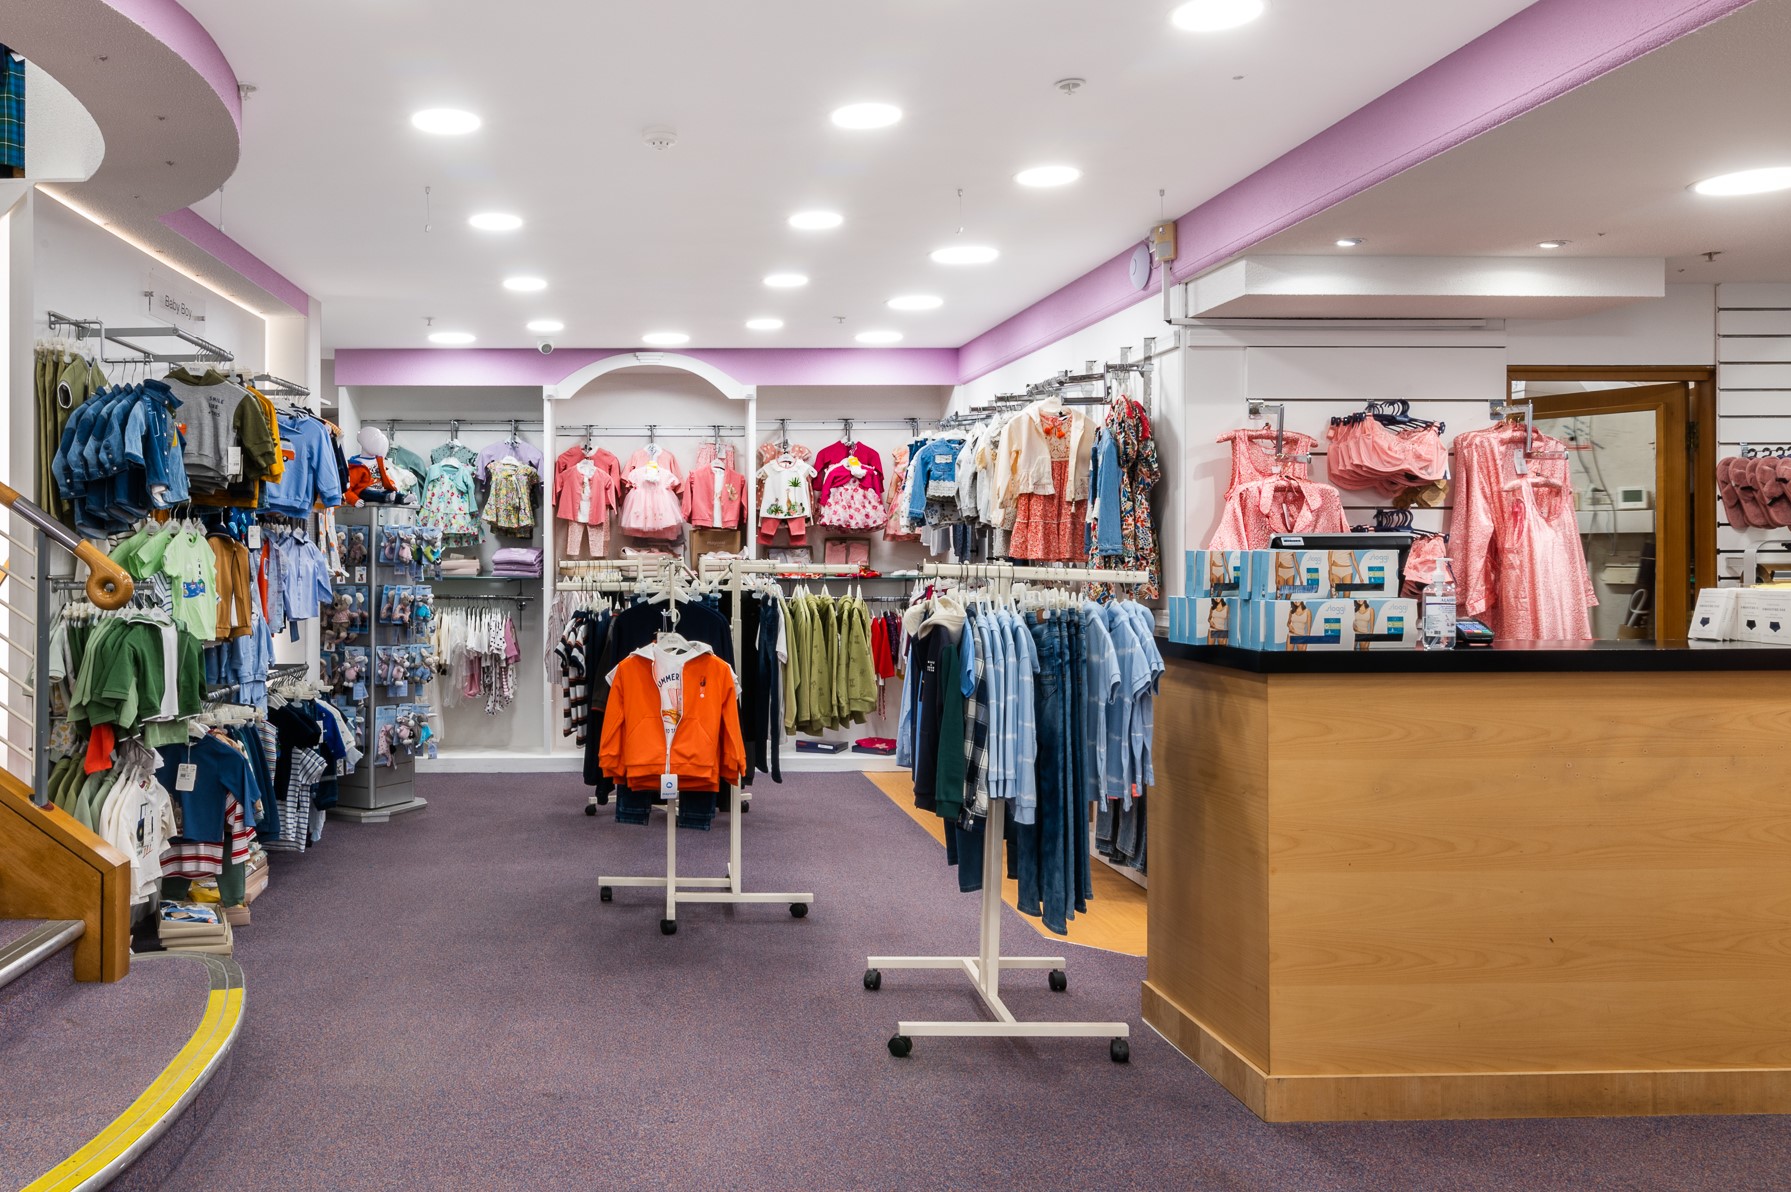 Children's clothing section